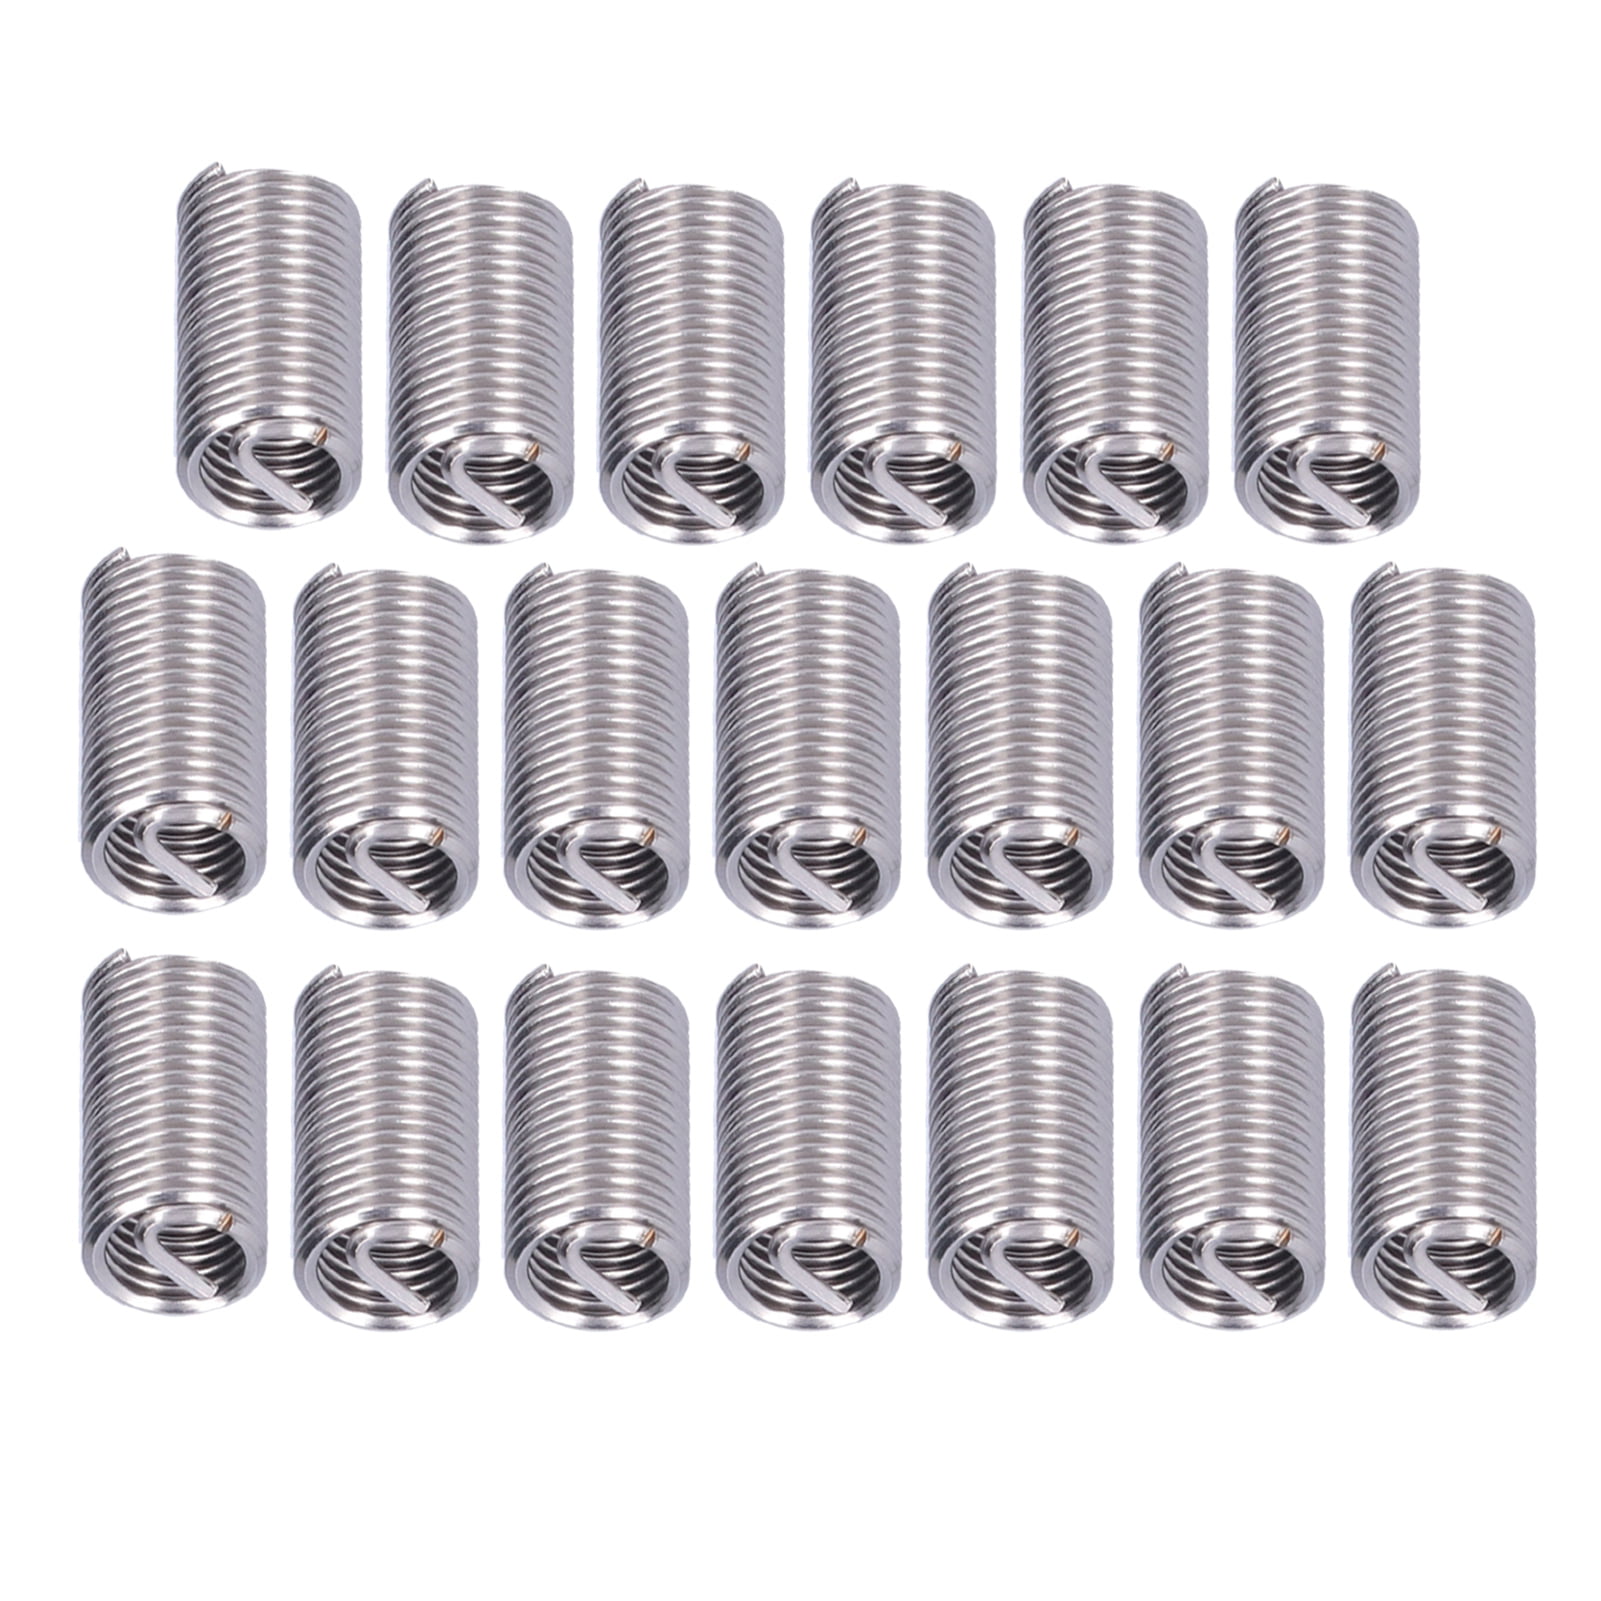 10 Off V-Coil Thread Repair Inserts M12 x 1.75 Compatible With Helicoil 2D 